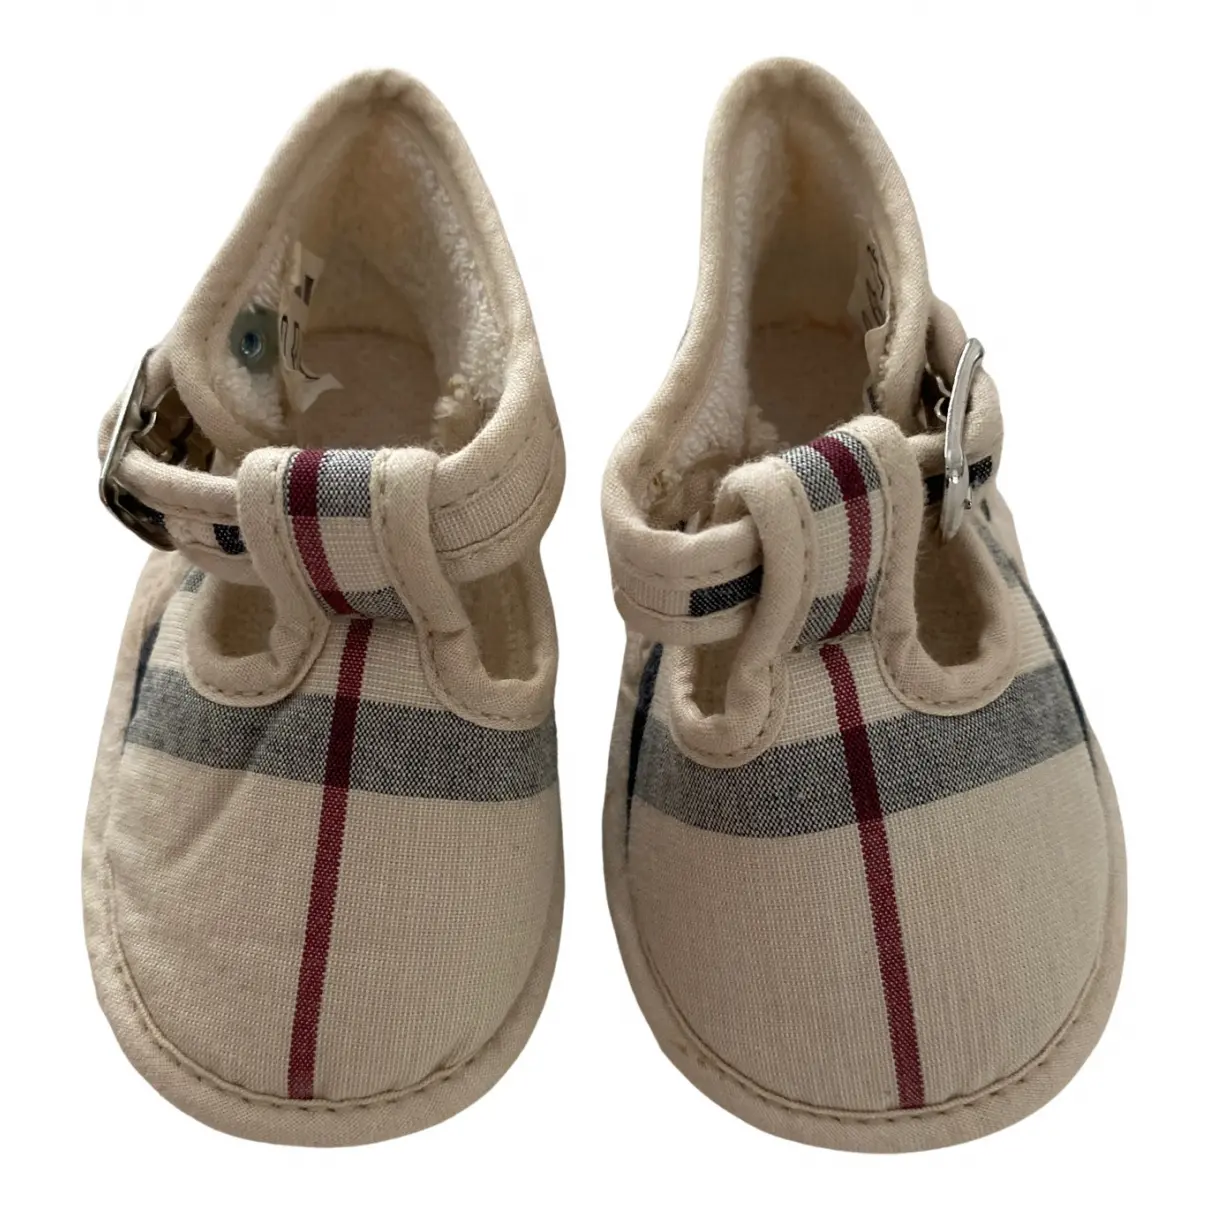 Cloth first shoes Burberry